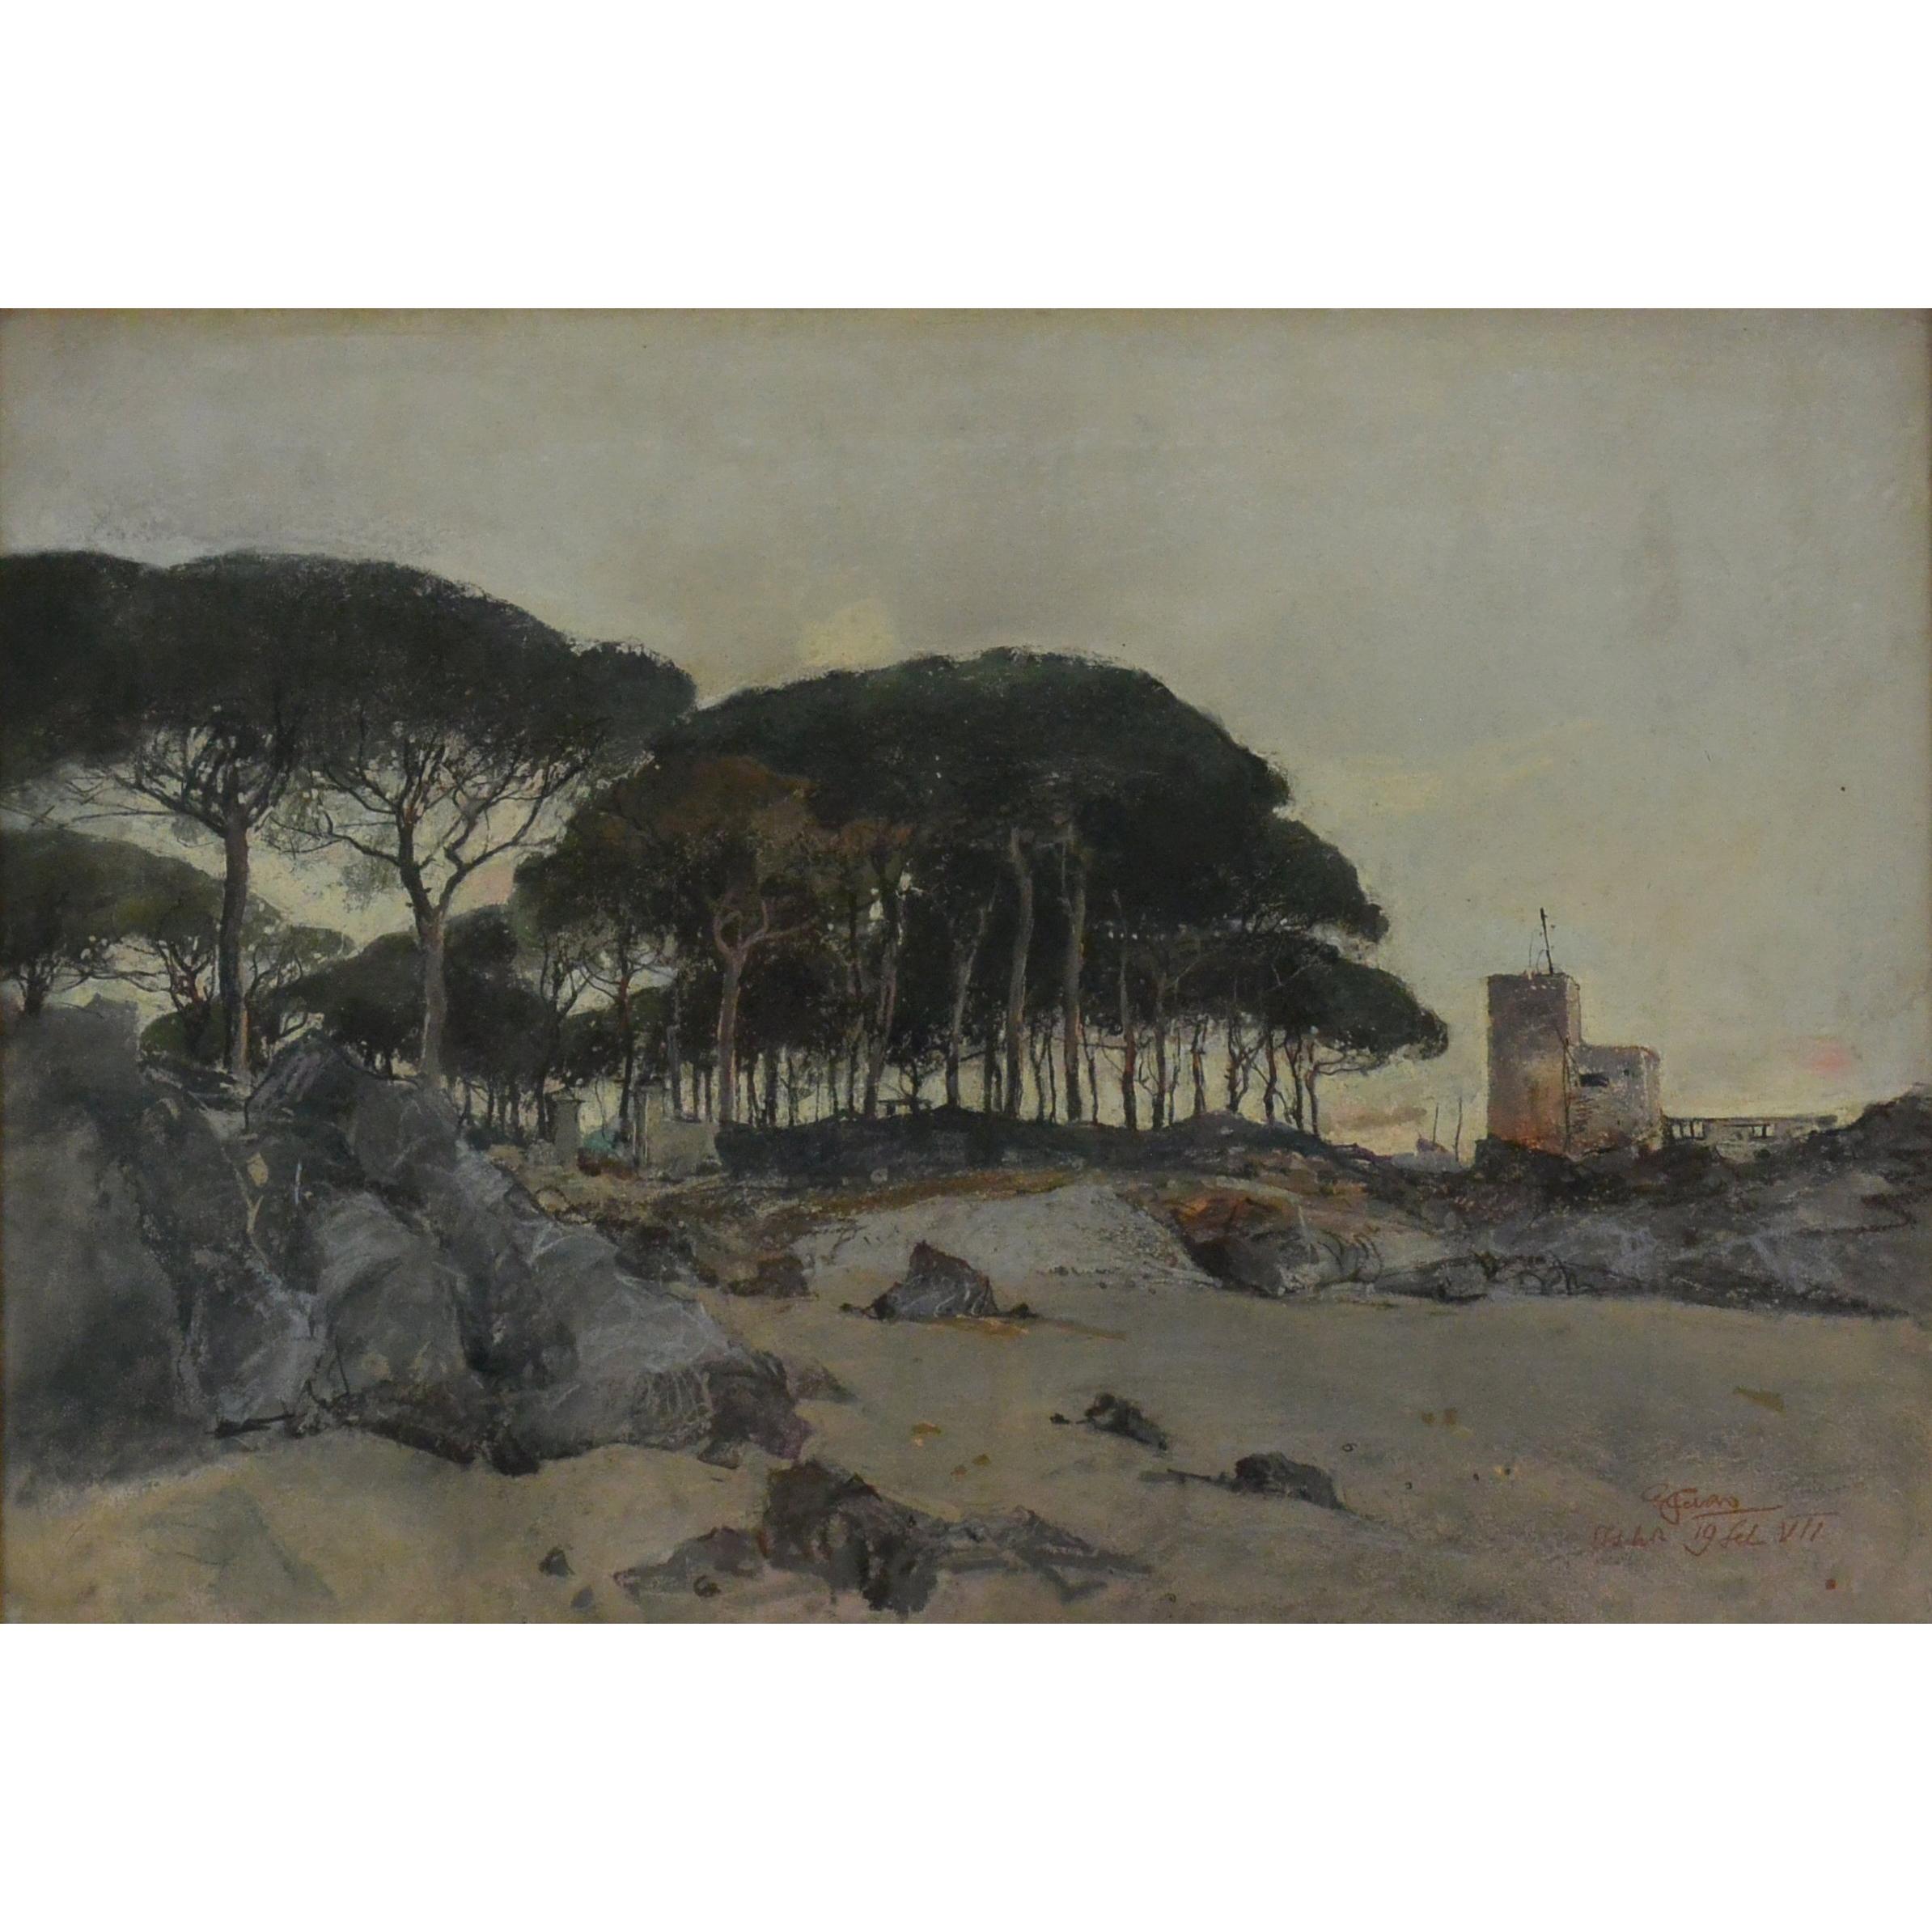 Giuseppe Casciaro, Ischia, 1929. Giuseppe Casciaro (1861-1941) Amalfi coast landscape with watchtower on the island of Ischia. Pastel and gouache on card. Signed and dated 19 Feb VII, Fascist year 1929. In original gilt frame with transparent back